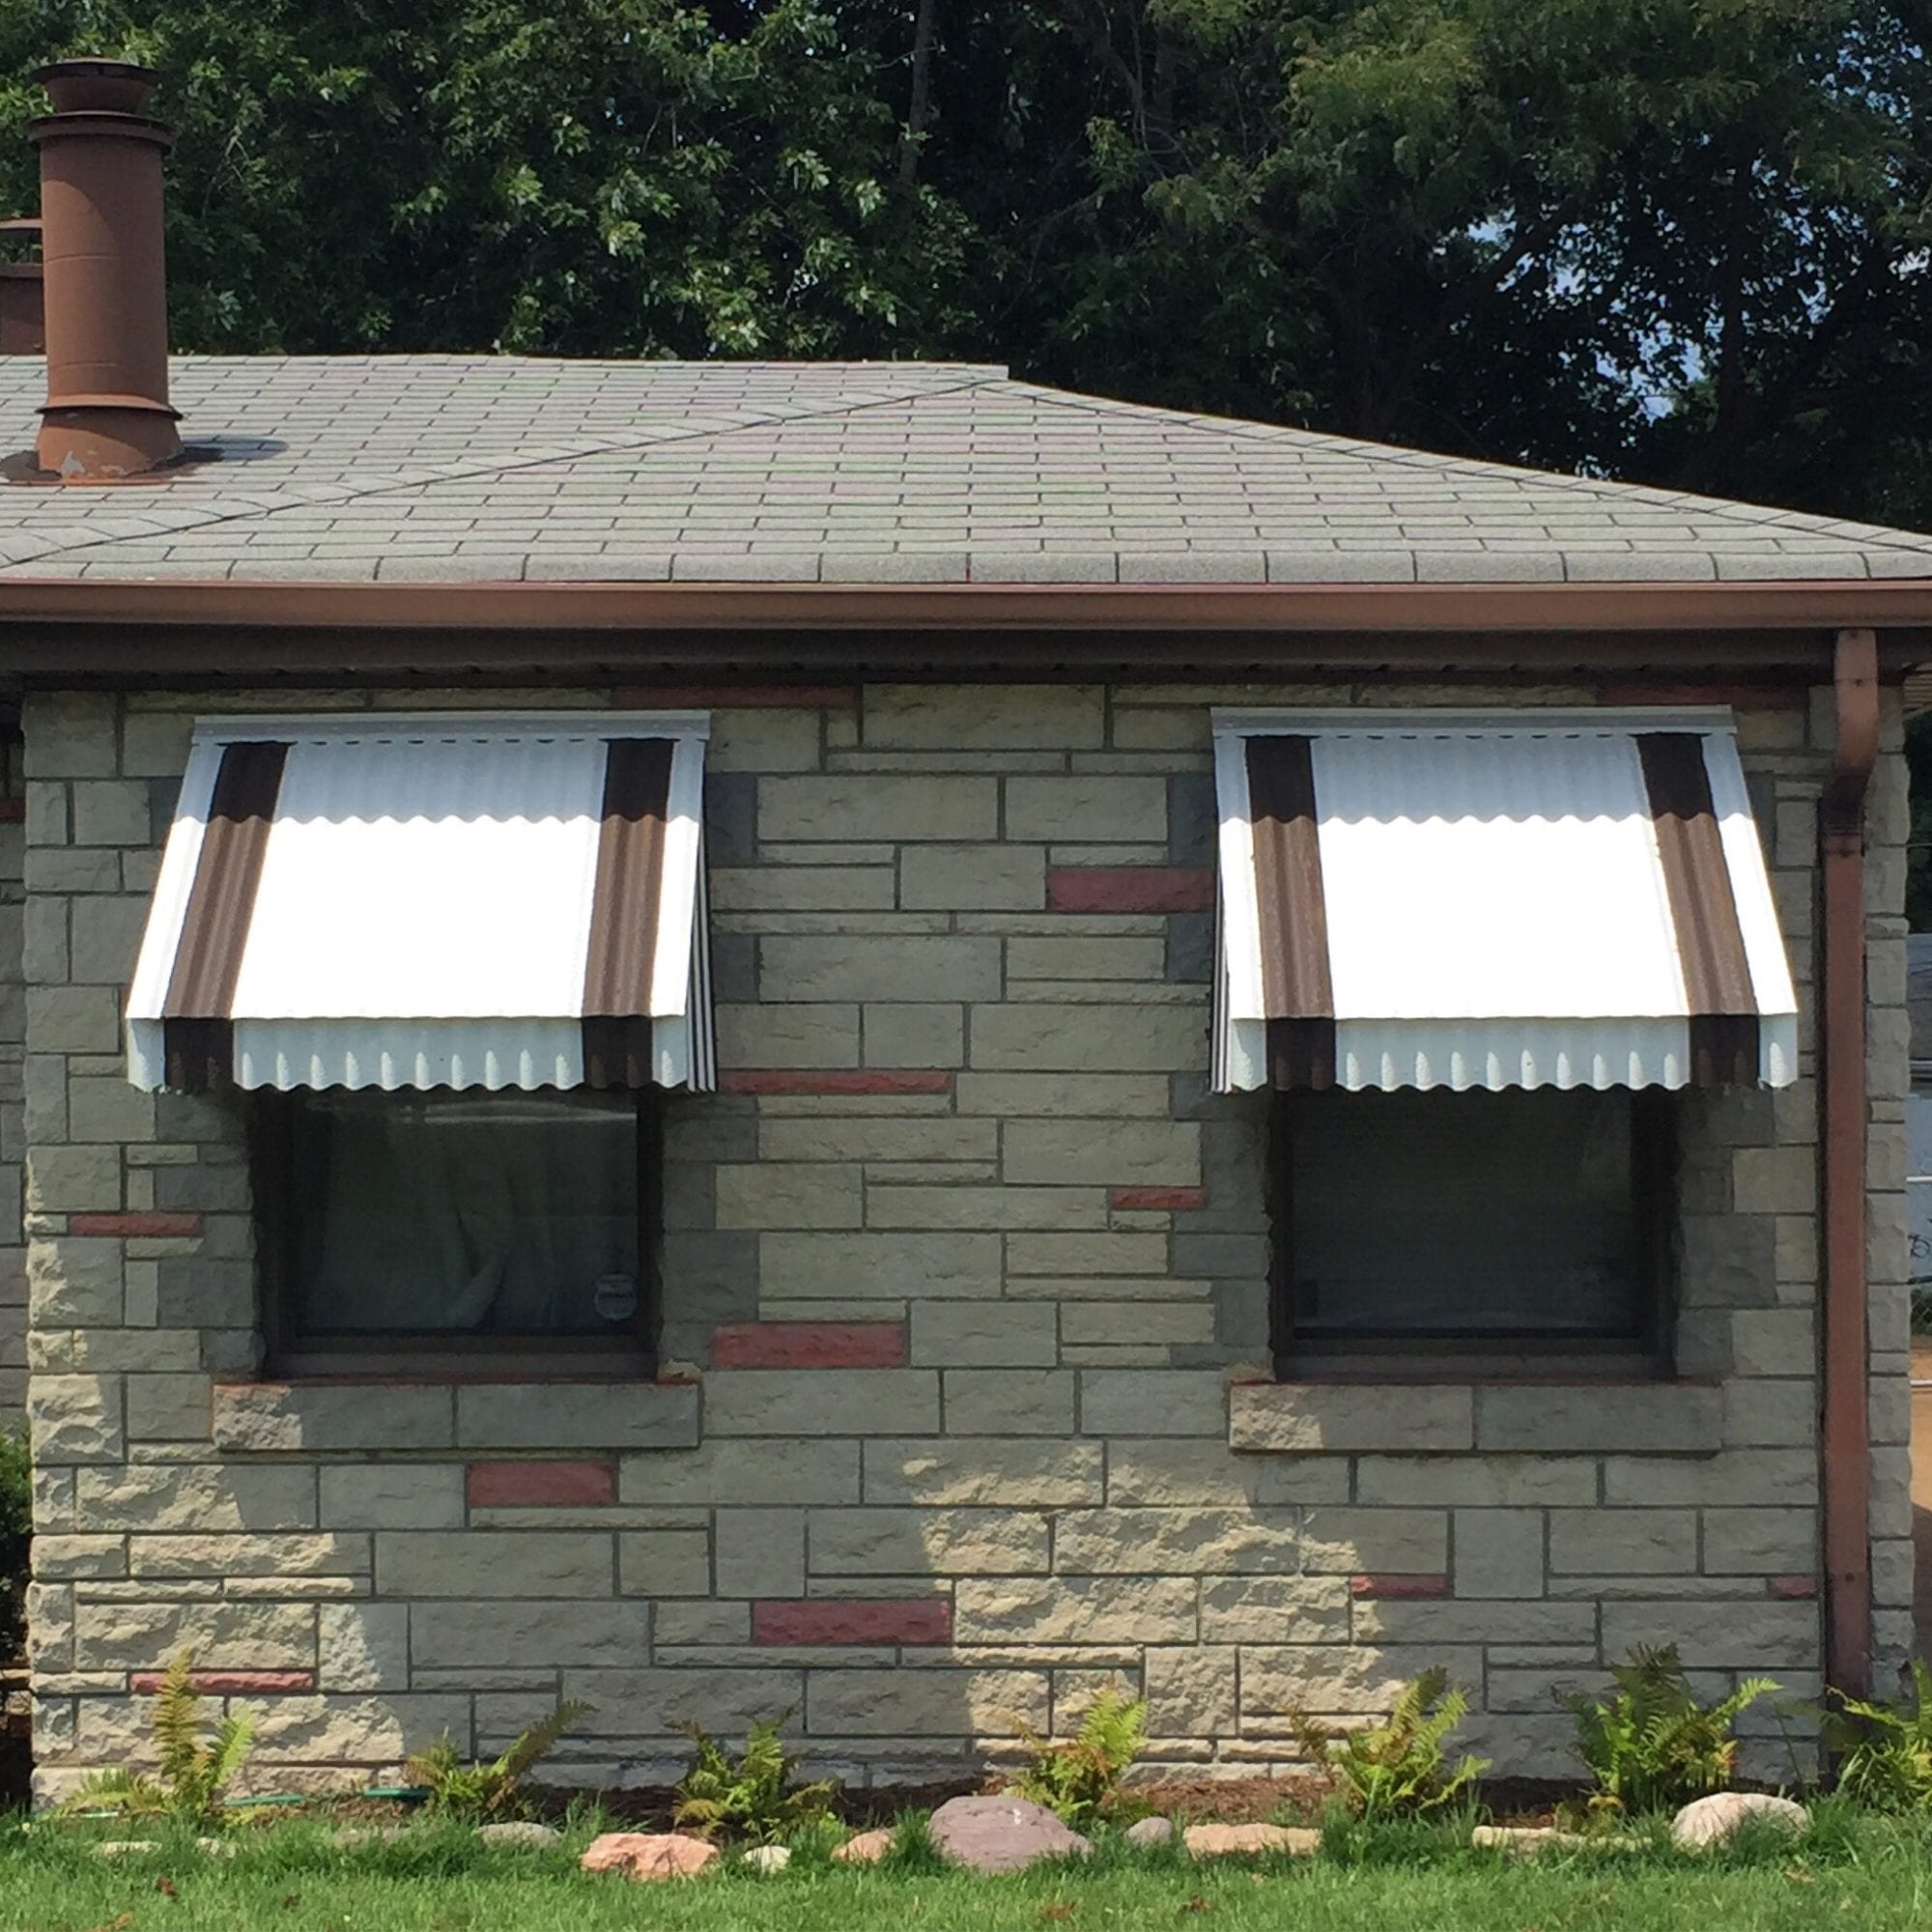 Metal awnings and Permastone on a home in Dutchtown, St. Louis. Photo by Josh Burbridge.